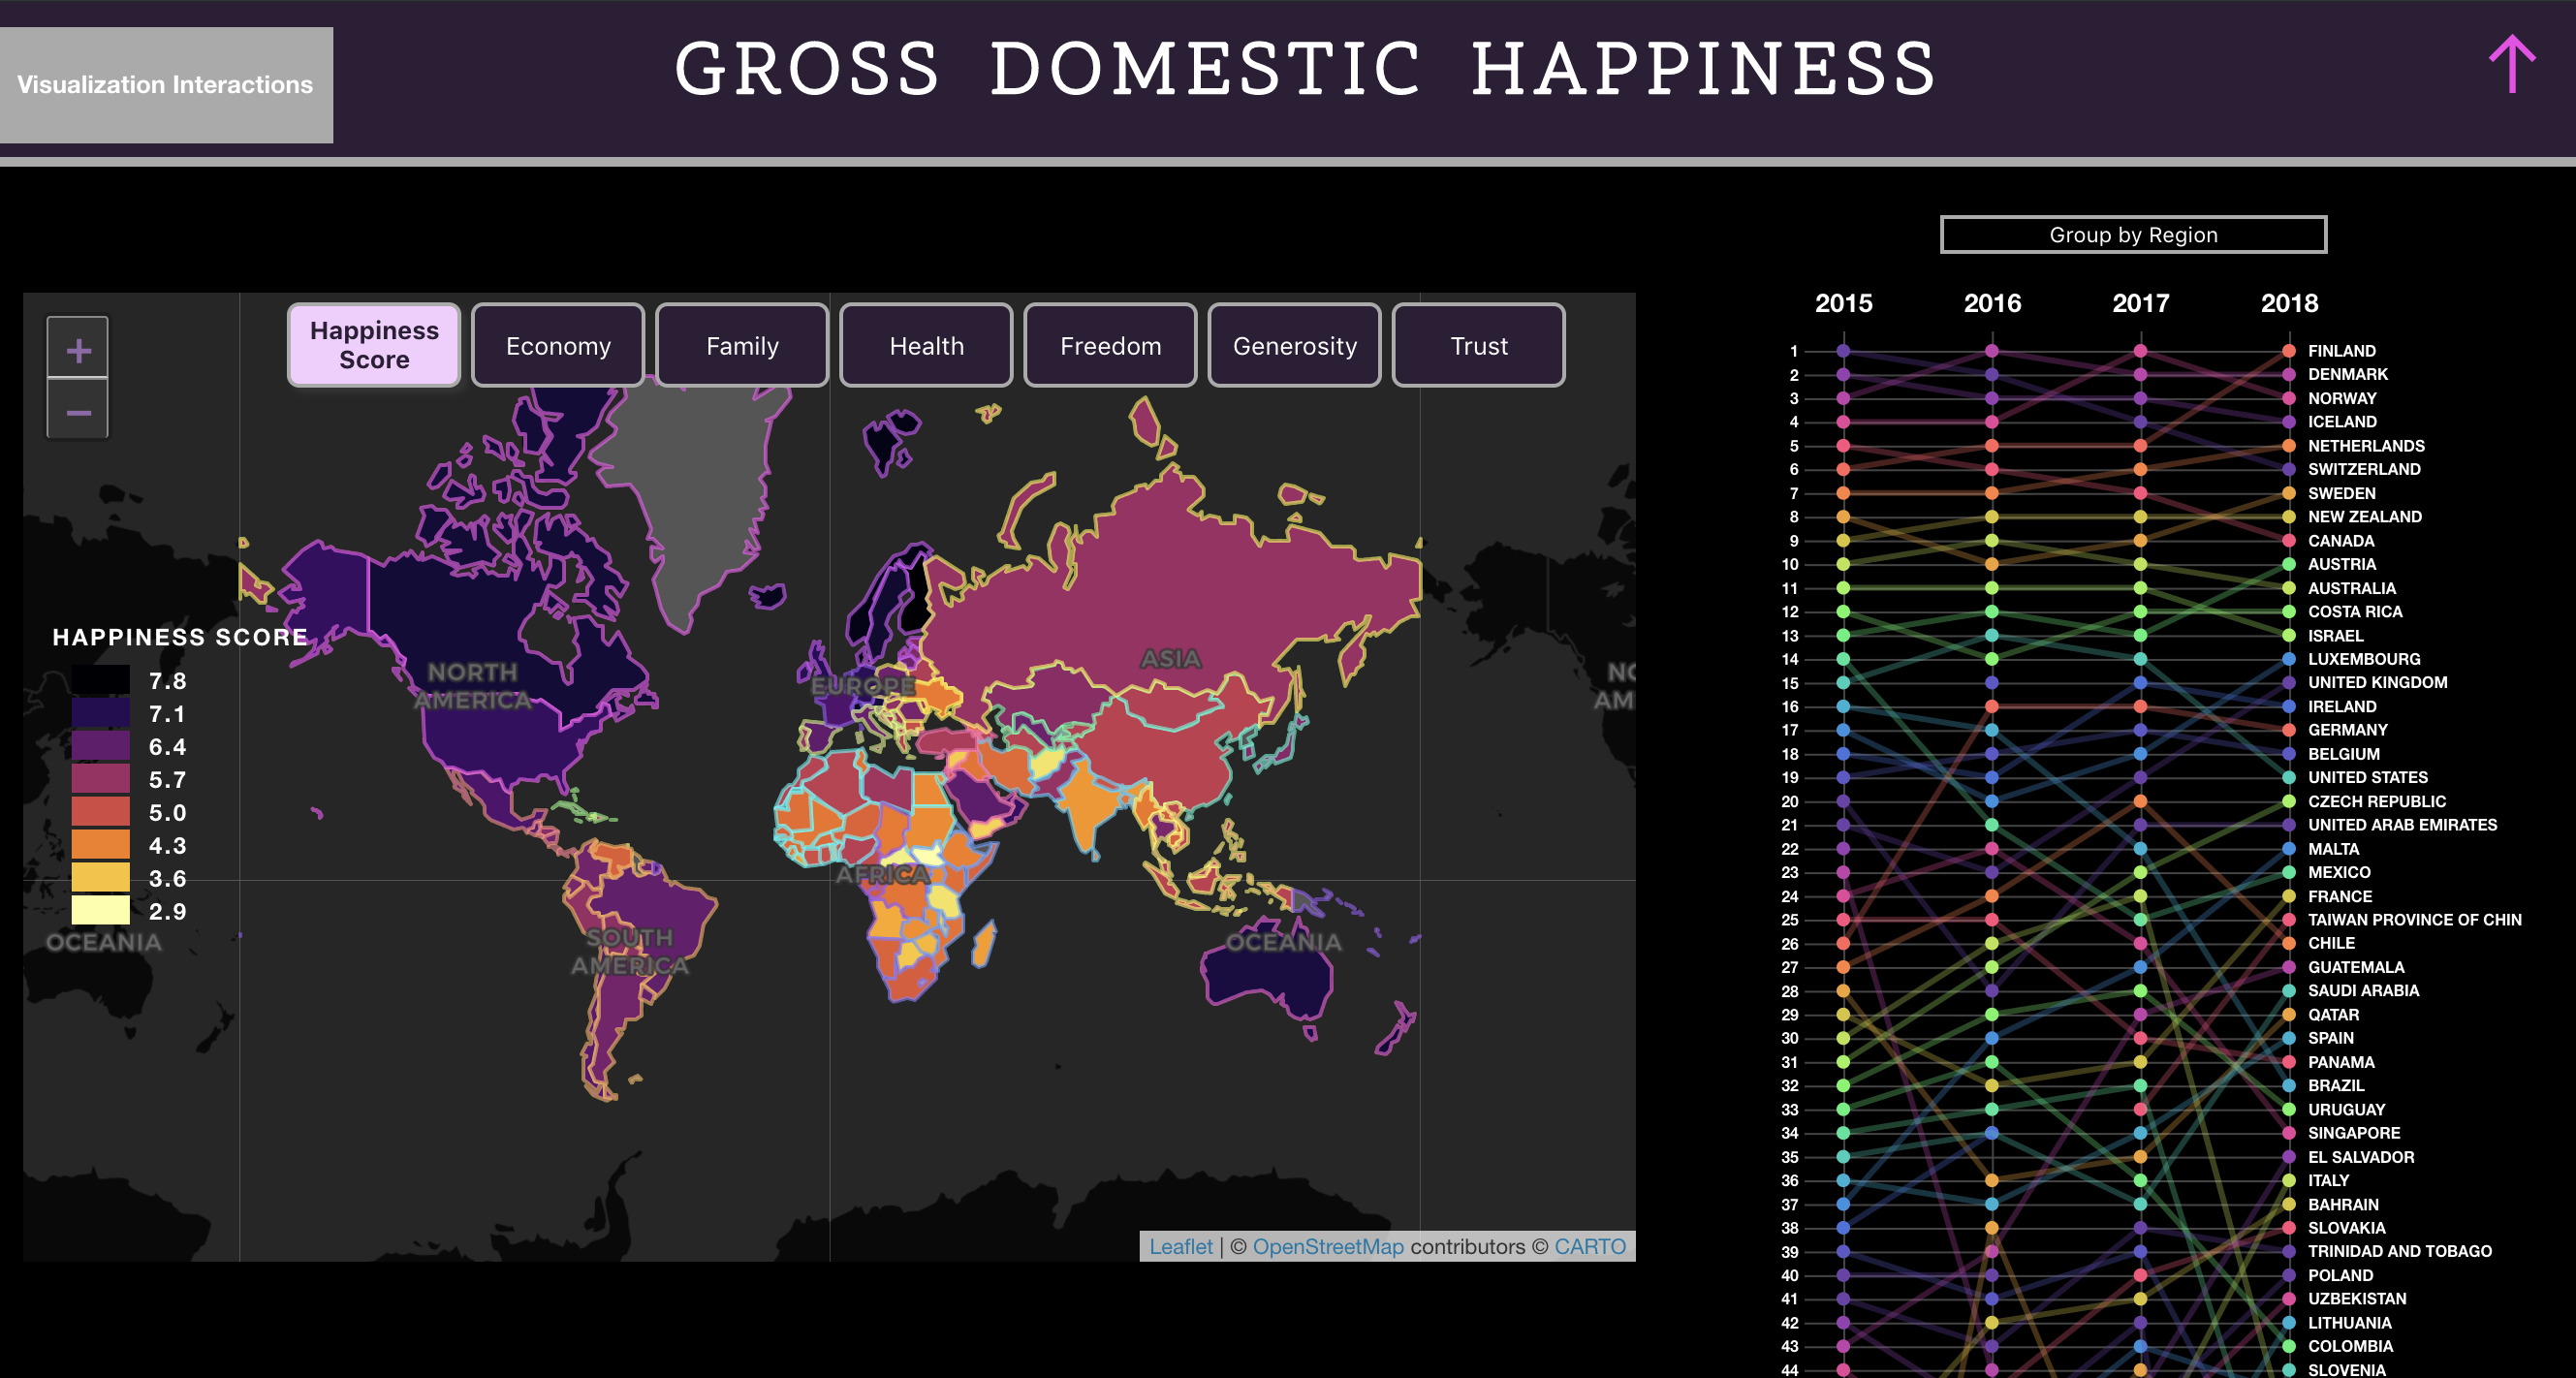 Screen capture of webpage with title 'Gross Domestic Happiness', world with colored countries, and bump chart